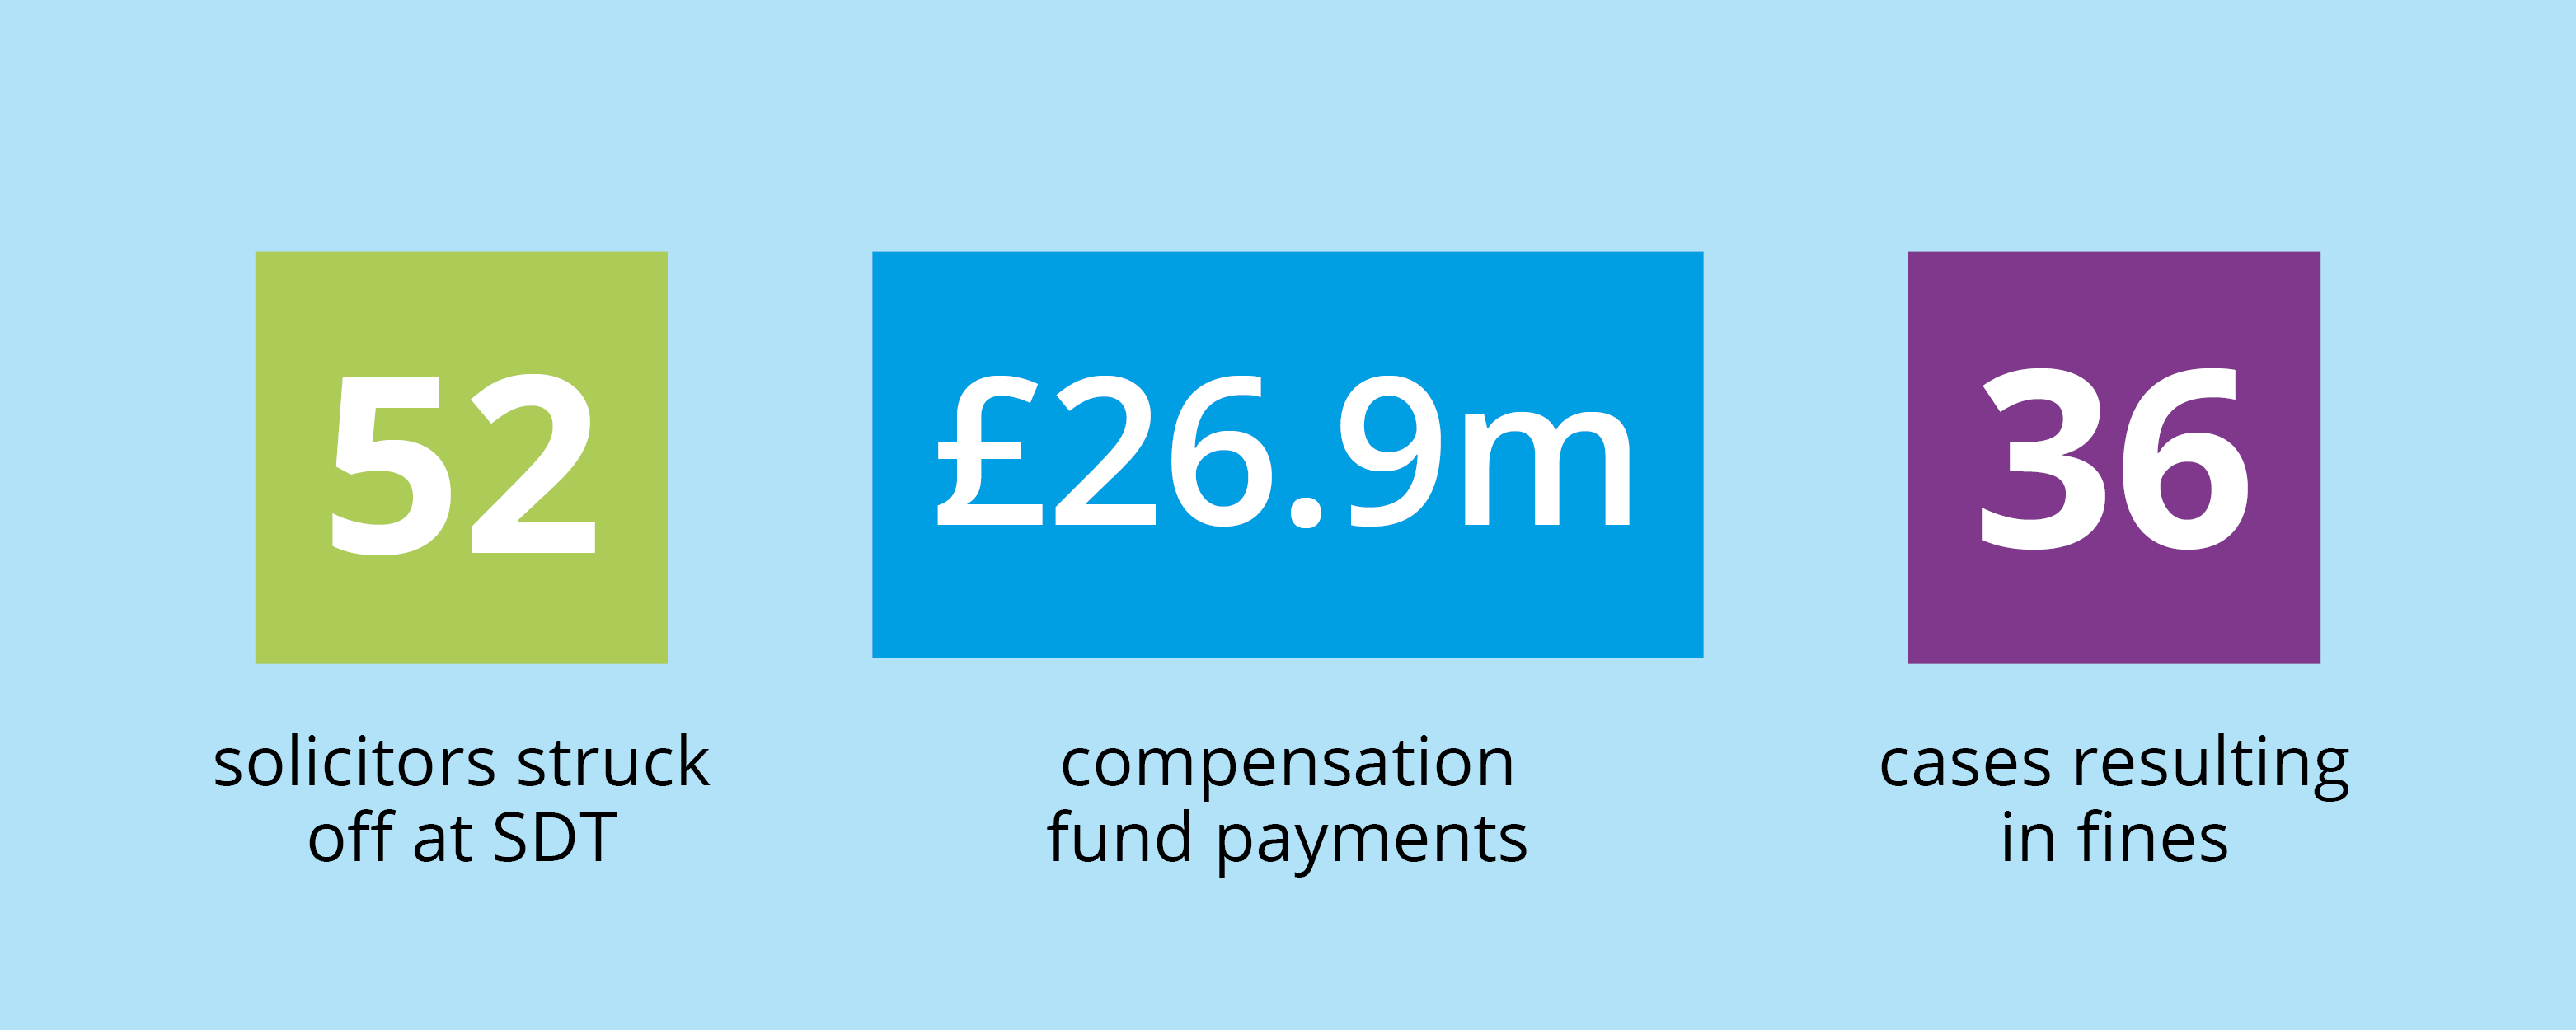 57 solicitors struck off at Solicitors Disciplinary Tribunal, 79 cases resulted in fines, £10.4m compensation fund payments